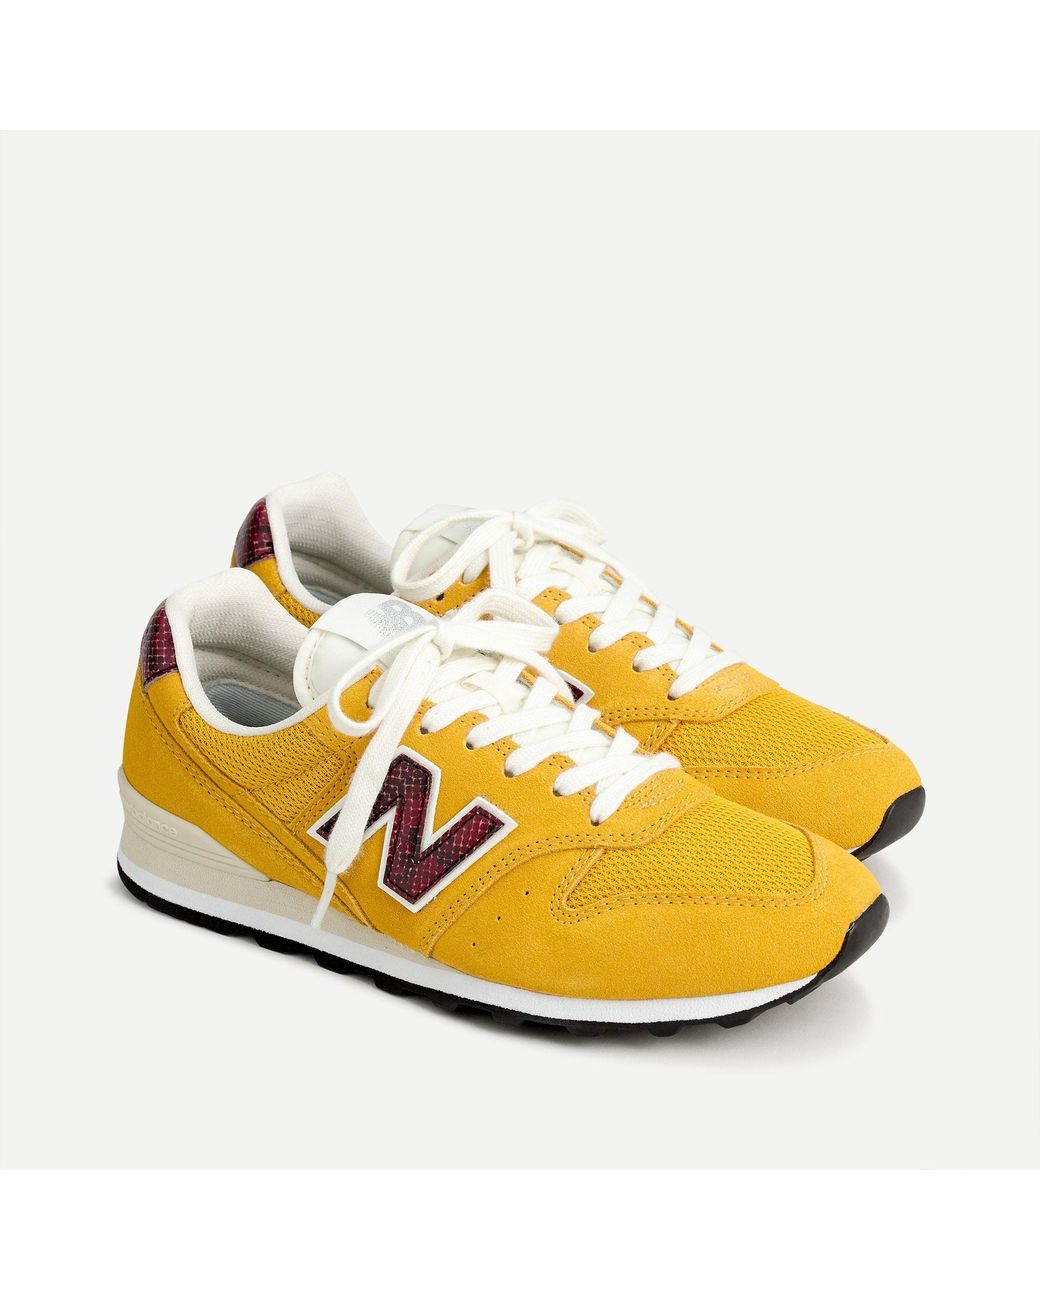 New Balance Suede ® X J.crew 996 Sneakers In Snakeskin in Yellow | Lyst